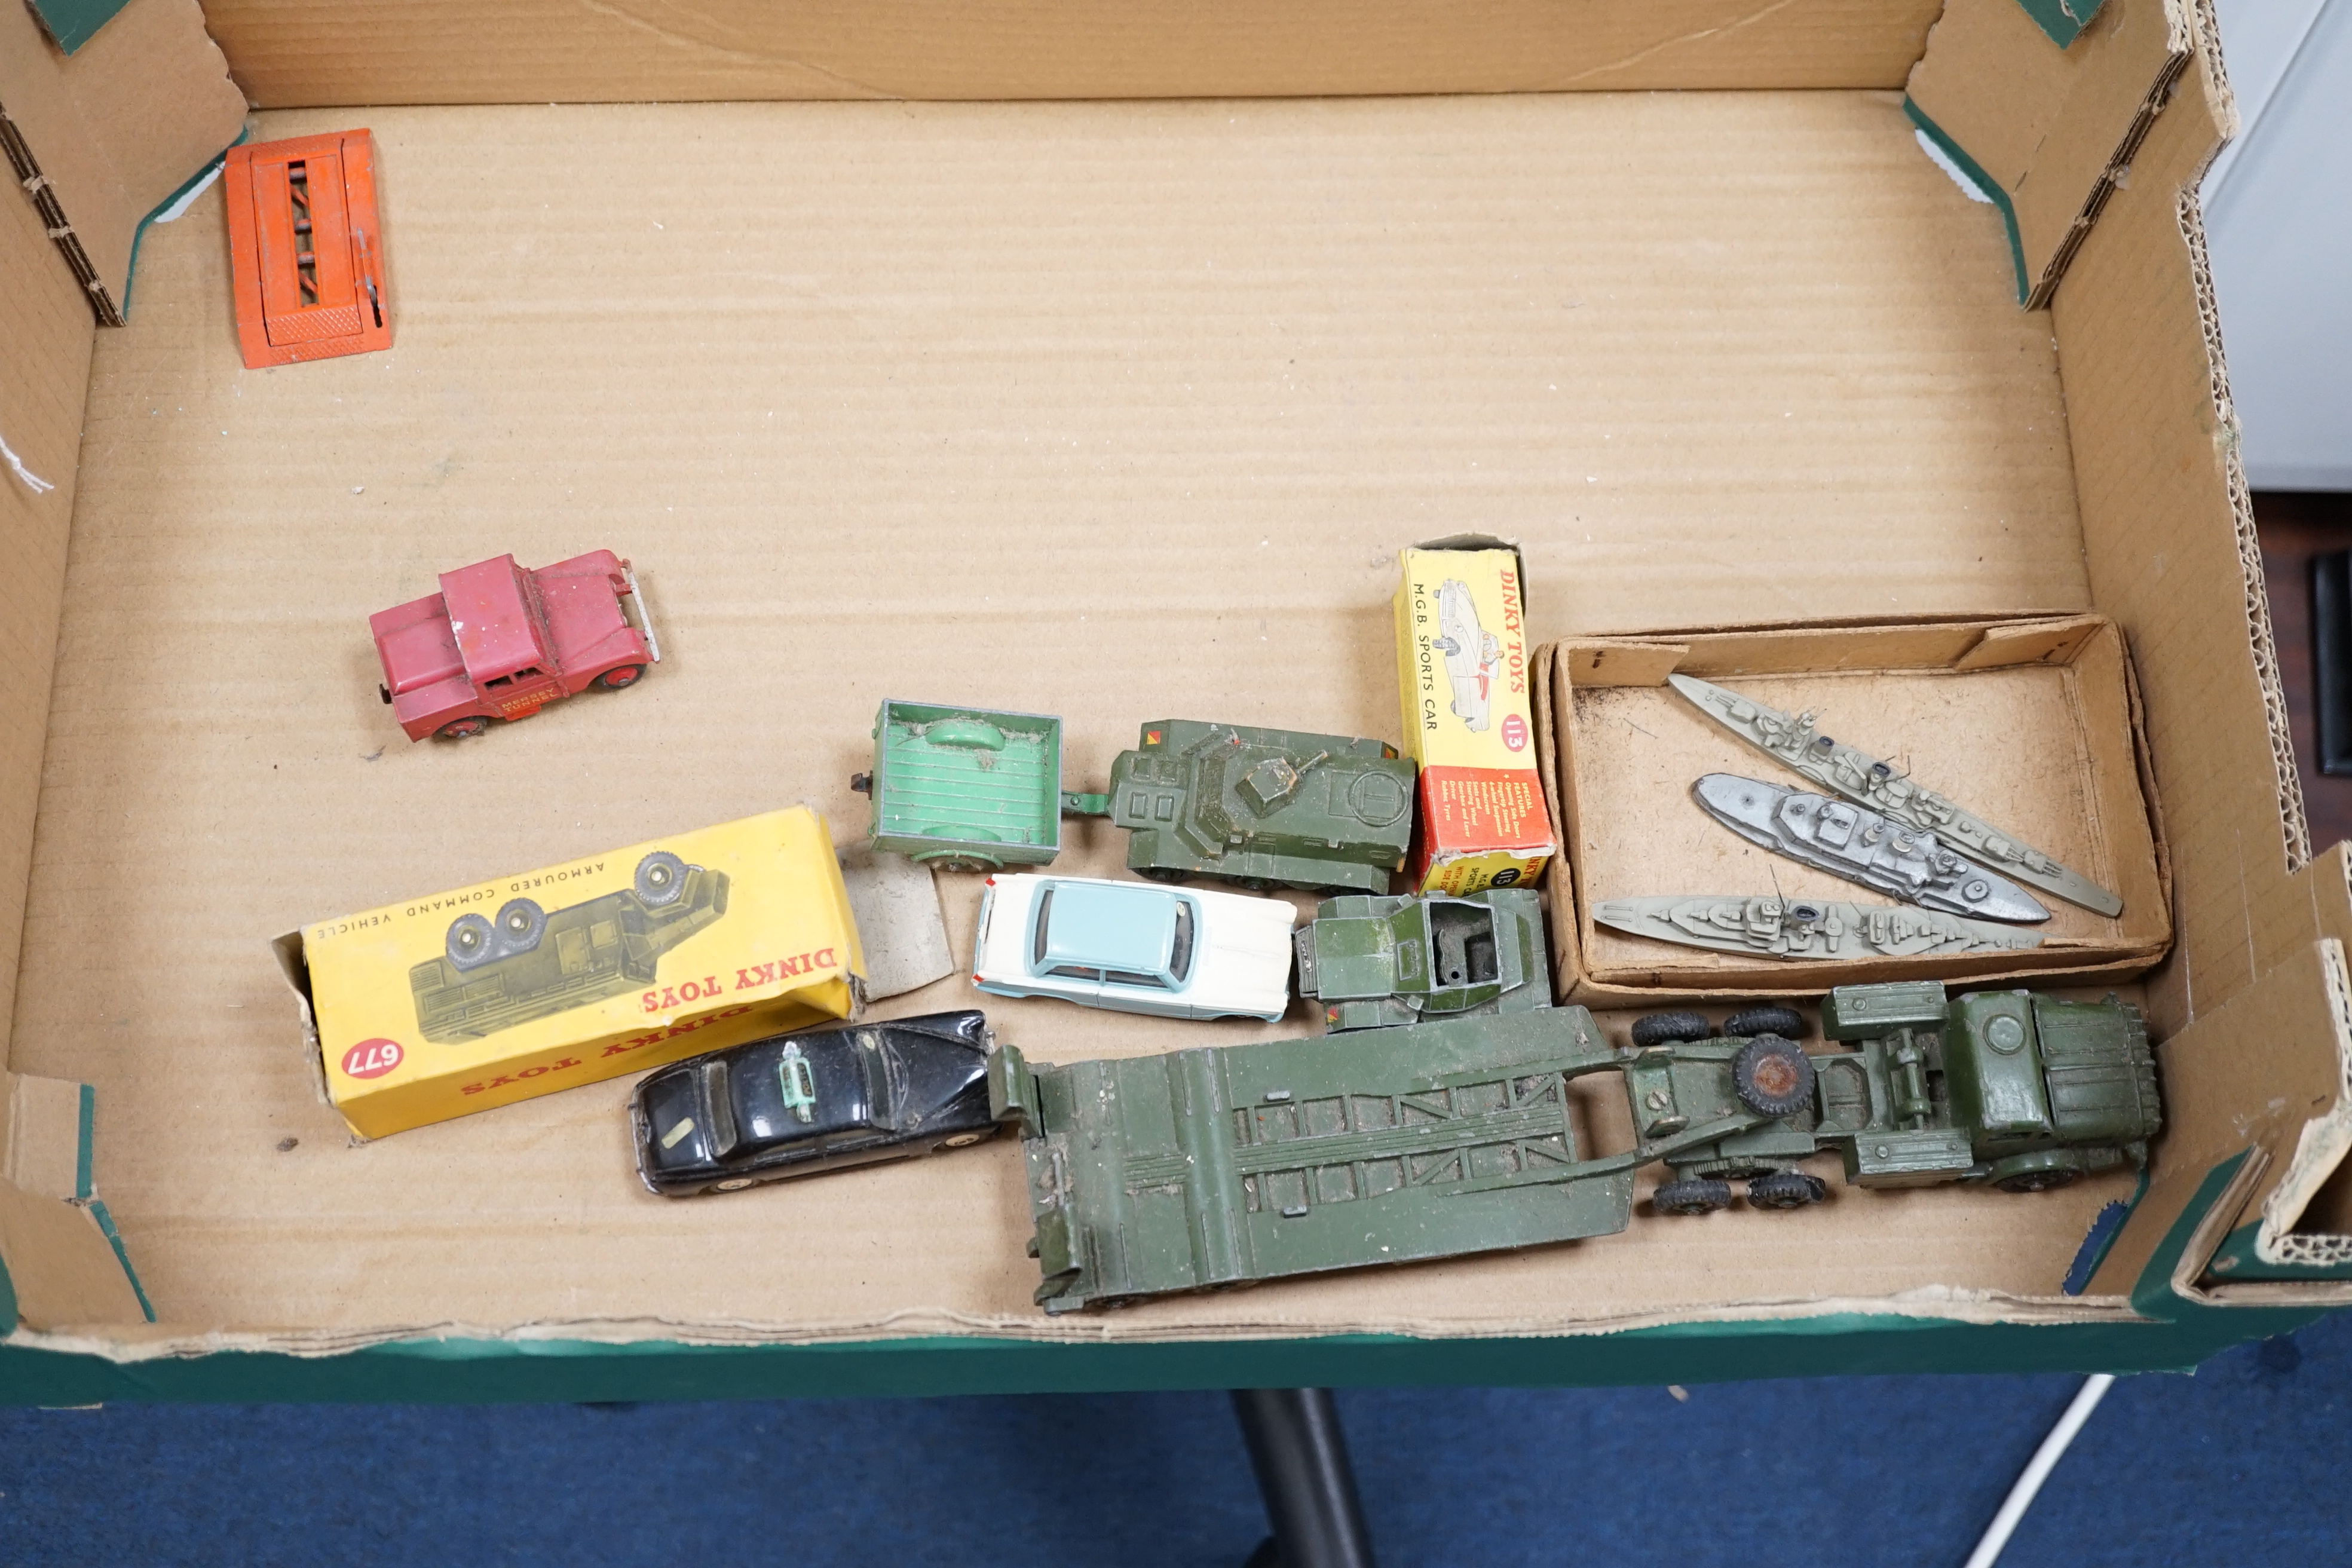 Thirteen Dinky Toys and Supertoys, etc. including; an MGB (113), a Riley Pathfinder, a Triumph Herald, an Armoured Command Vehicle (677), a 20-ton Mounted Crane (972), a Recovery Tractor (661)